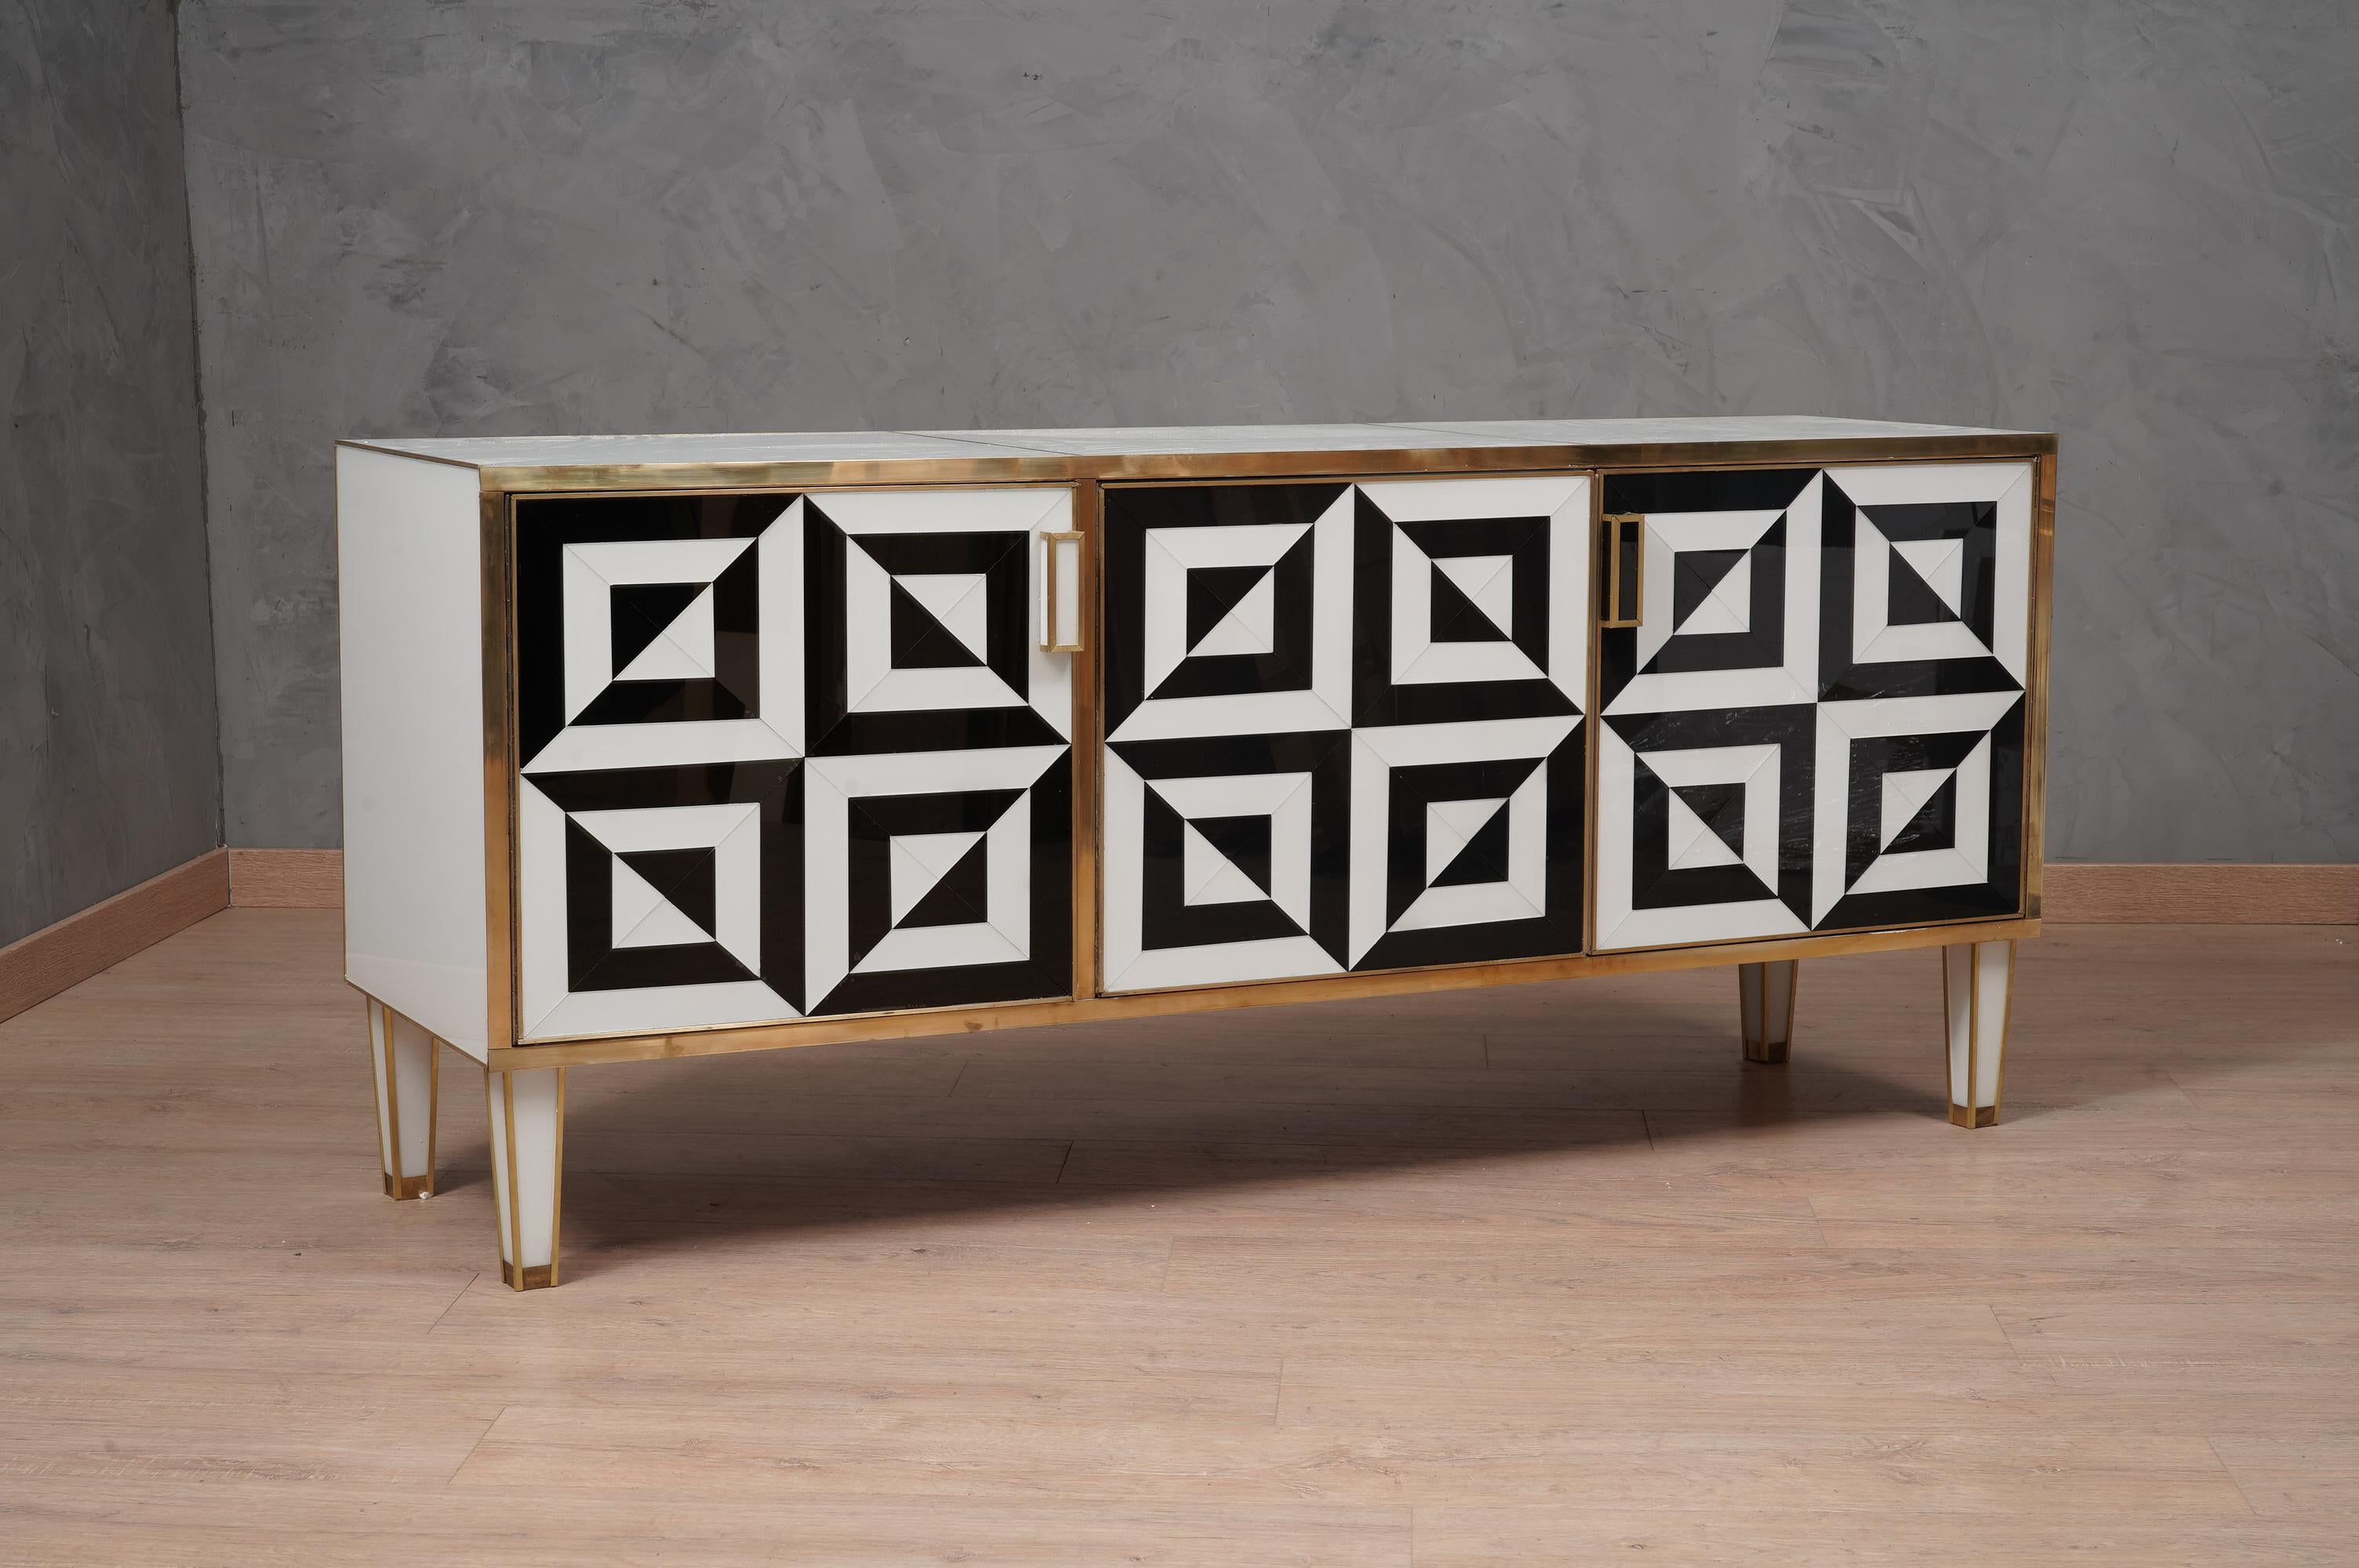 Italian-style sideboard entirely in black and white glass; fronts of the doors with play of color of the glasses.

The sideboard has a wooden structure with three beautiful very wide doors. The structure was completely covered in white glass and